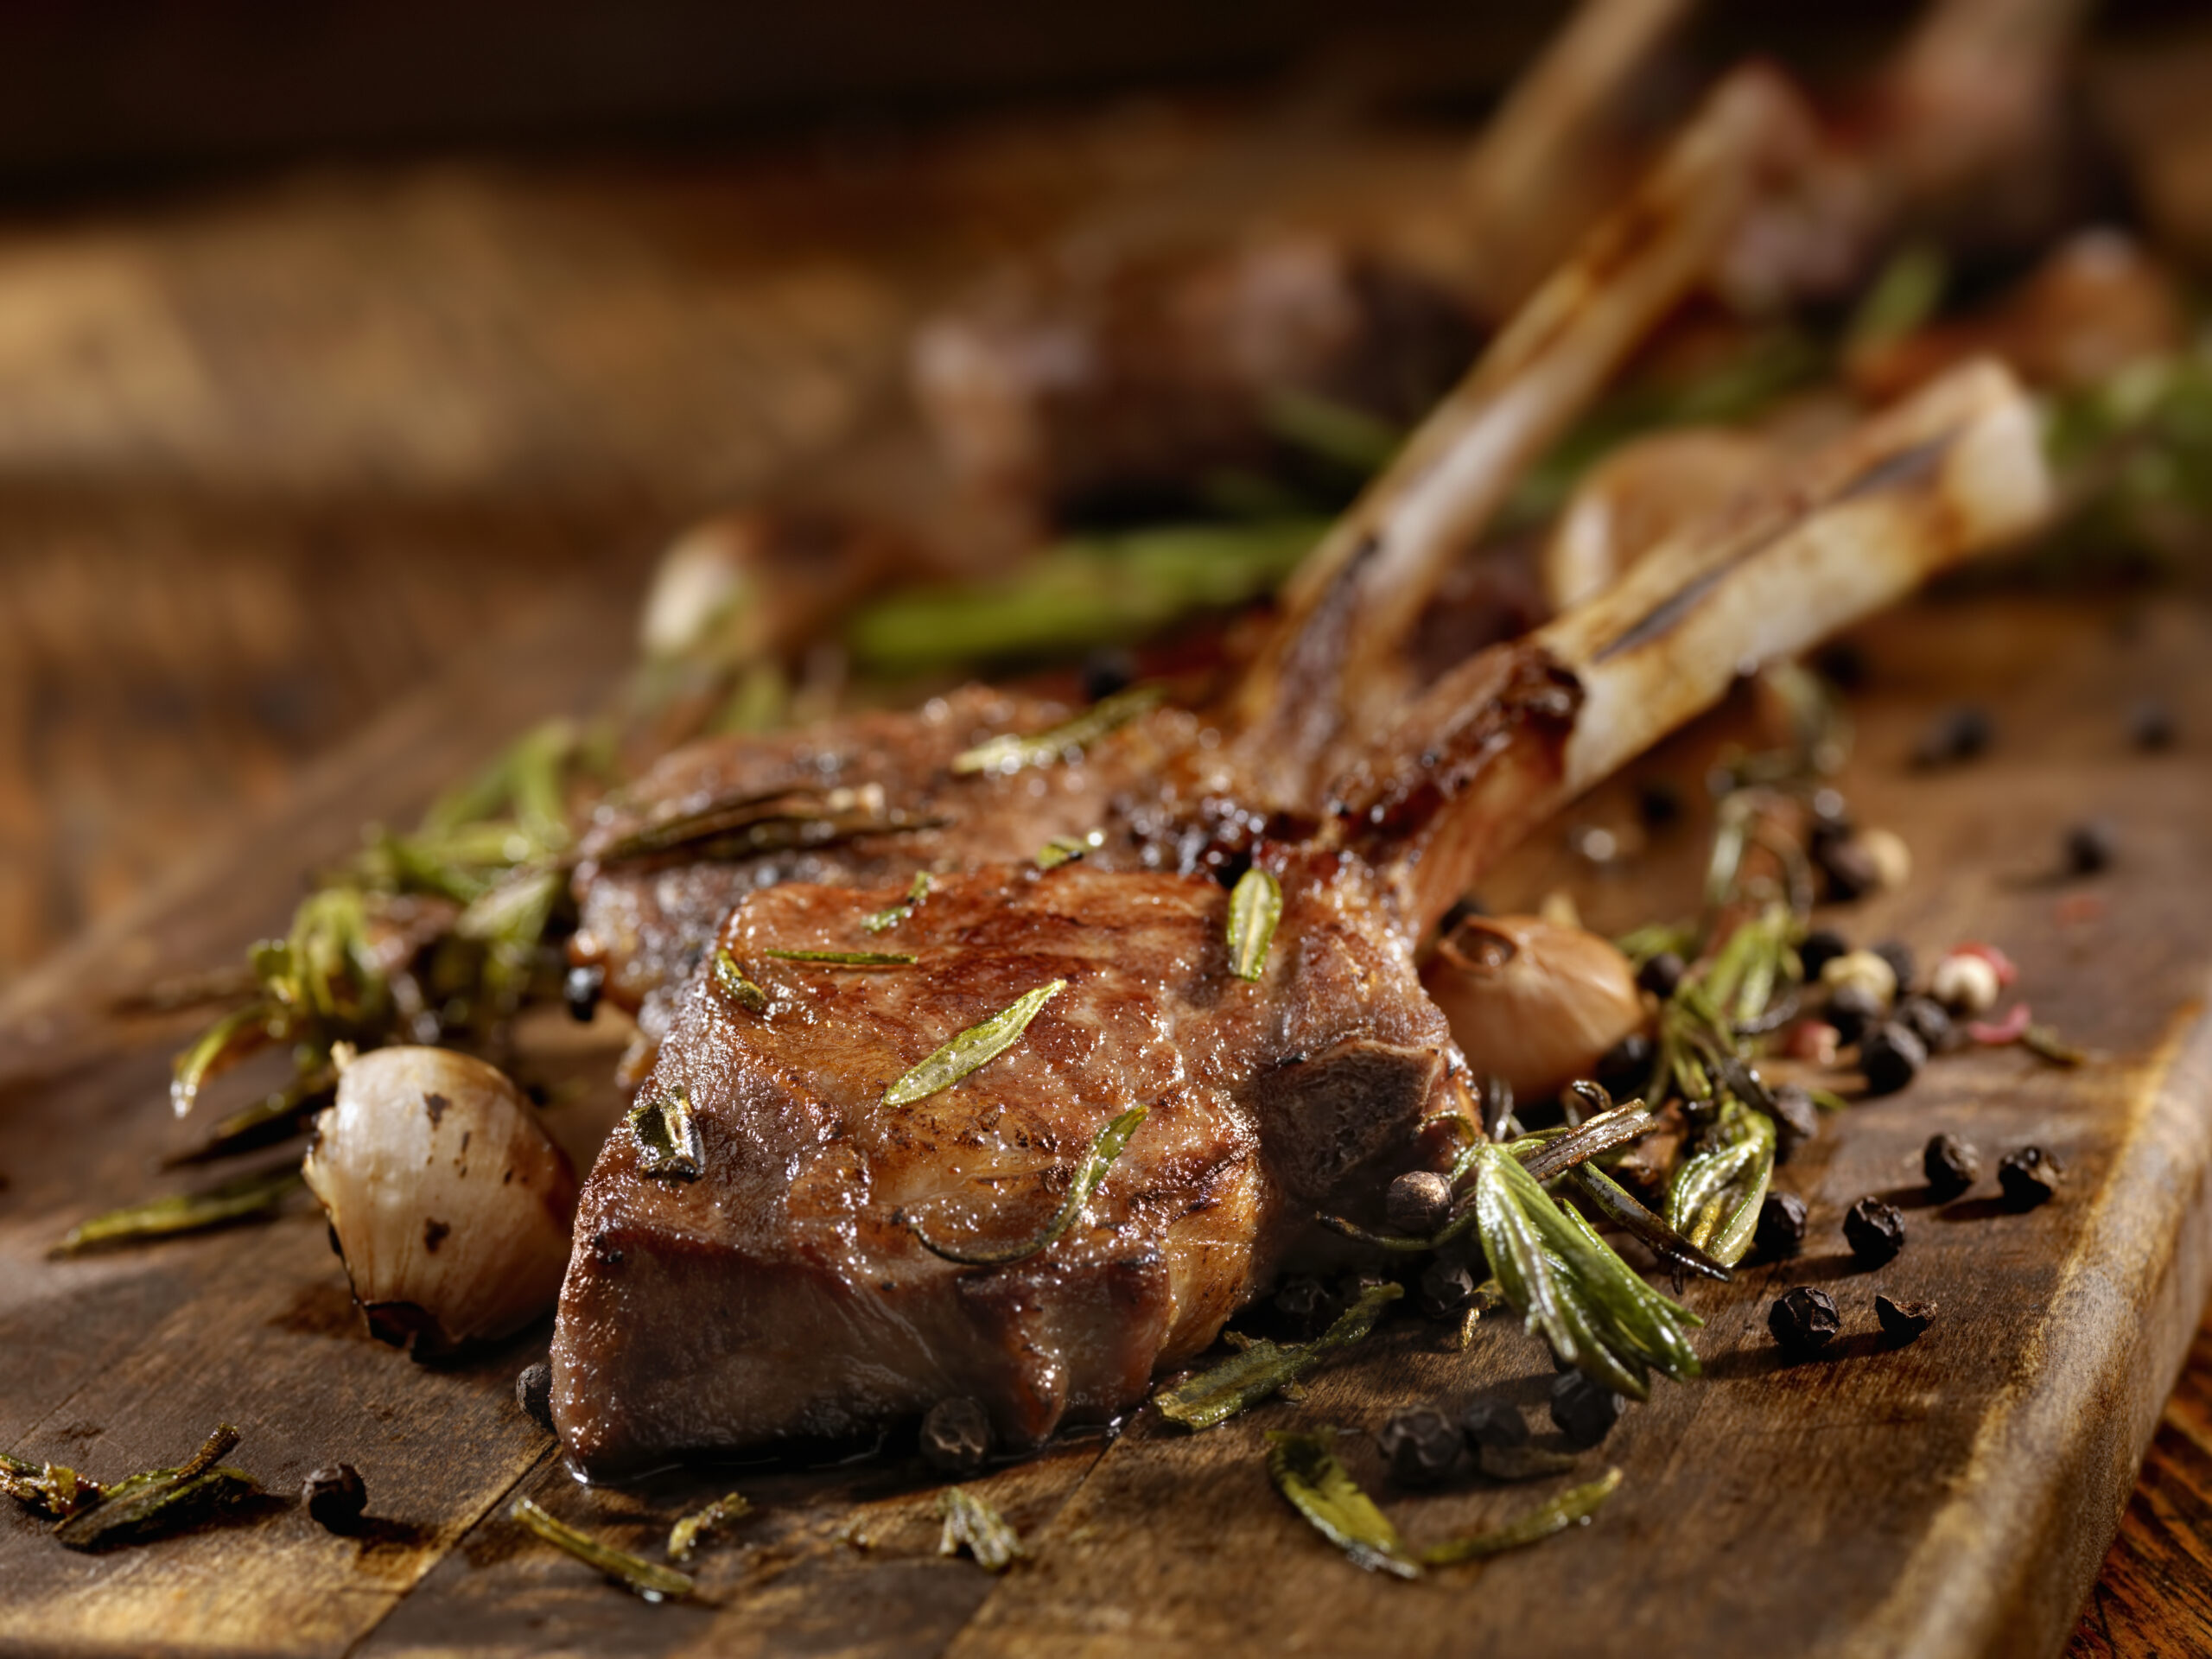 Rack of Lamb with Garlic, Rosemary and Peppercorns

for Veal Scallopini